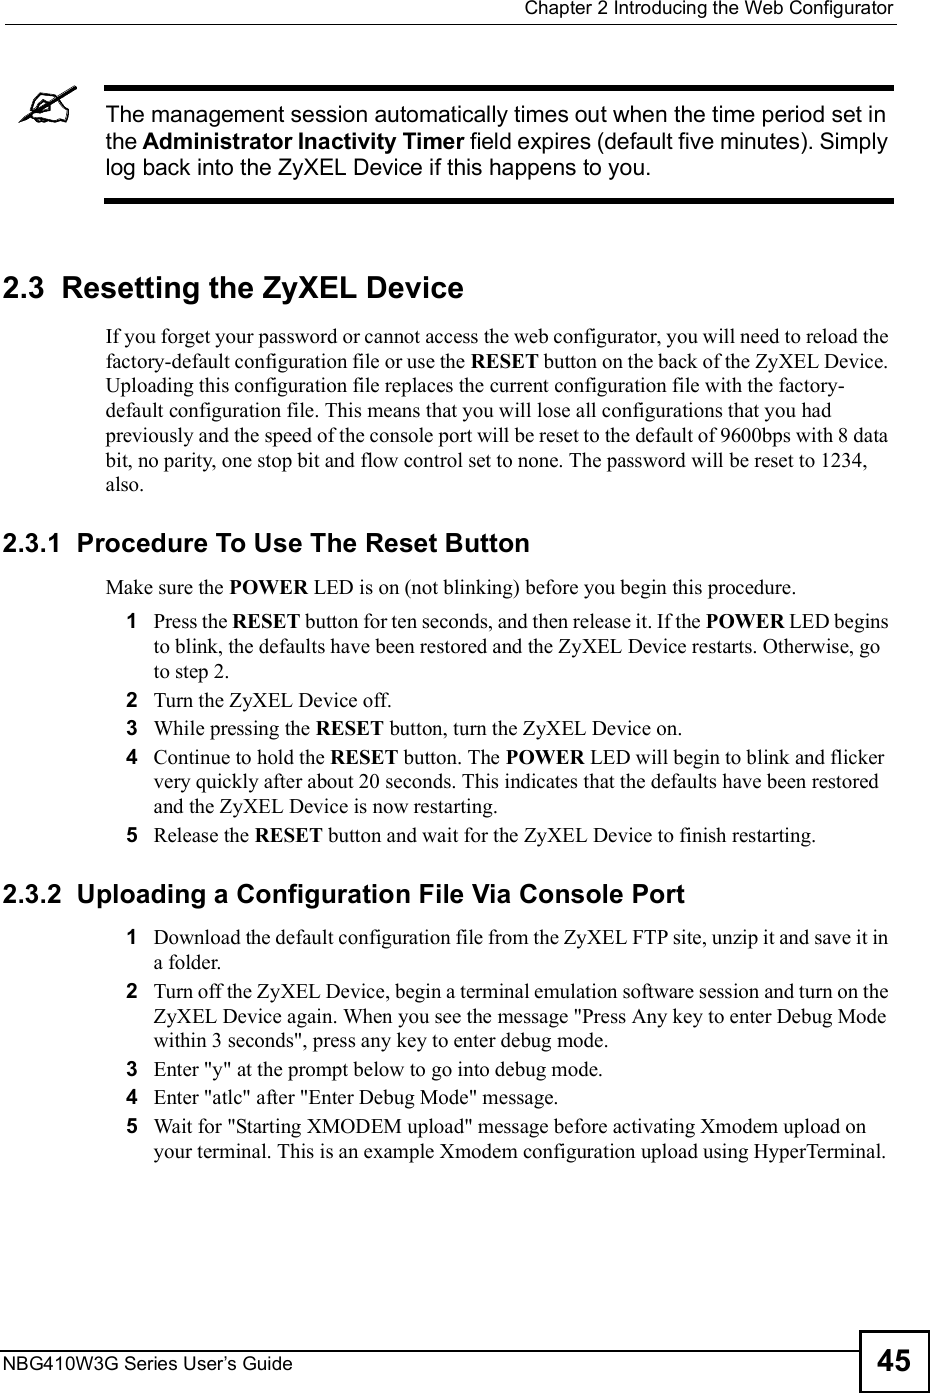  Chapter 2Introducing the Web ConfiguratorNBG410W3G Series User s Guide 45The management session automatically times out when the time period set in the Administrator Inactivity Timer field expires (default five minutes). Simply log back into the ZyXEL Device if this happens to you.2.3  Resetting the ZyXEL DeviceIf you forget your password or cannot access the web configurator, you will need to reload the factory-default configuration file or use the RESET button on the back of the ZyXEL Device. Uploading this configuration file replaces the current configuration file with the factory-default configuration file. This means that you will lose all configurations that you had previously and the speed of the console port will be reset to the default of 9600bps with 8 data bit, no parity, one stop bit and flow control set to none. The password will be reset to 1234, also.2.3.1  Procedure To Use The Reset ButtonMake sure the POWER LED is on (not blinking) before you begin this procedure. 1Press the RESET button for ten seconds, and then release it. If the POWER LED begins to blink, the defaults have been restored and the ZyXEL Device restarts. Otherwise, go to step 2.2Turn the ZyXEL Device off.3While pressing the RESET button, turn the ZyXEL Device on.4Continue to hold the RESET button. The POWER LED will begin to blink and flicker very quickly after about 20 seconds. This indicates that the defaults have been restored and the ZyXEL Device is now restarting.5Release the RESET button and wait for the ZyXEL Device to finish restarting.2.3.2  Uploading a Configuration File Via Console Port1Download the default configuration file from the ZyXEL FTP site, unzip it and save it in a folder.2Turn off the ZyXEL Device, begin a terminal emulation software session and turn on the ZyXEL Device again. When you see the message &quot;Press Any key to enter Debug Mode within 3 seconds&quot;, press any key to enter debug mode. 3Enter &quot;y&quot; at the prompt below to go into debug mode.4Enter &quot;atlc&quot; after &quot;Enter Debug Mode&quot; message.5Wait for &quot;Starting XMODEM upload&quot; message before activating Xmodem upload on your terminal. This is an example Xmodem configuration upload using HyperTerminal.